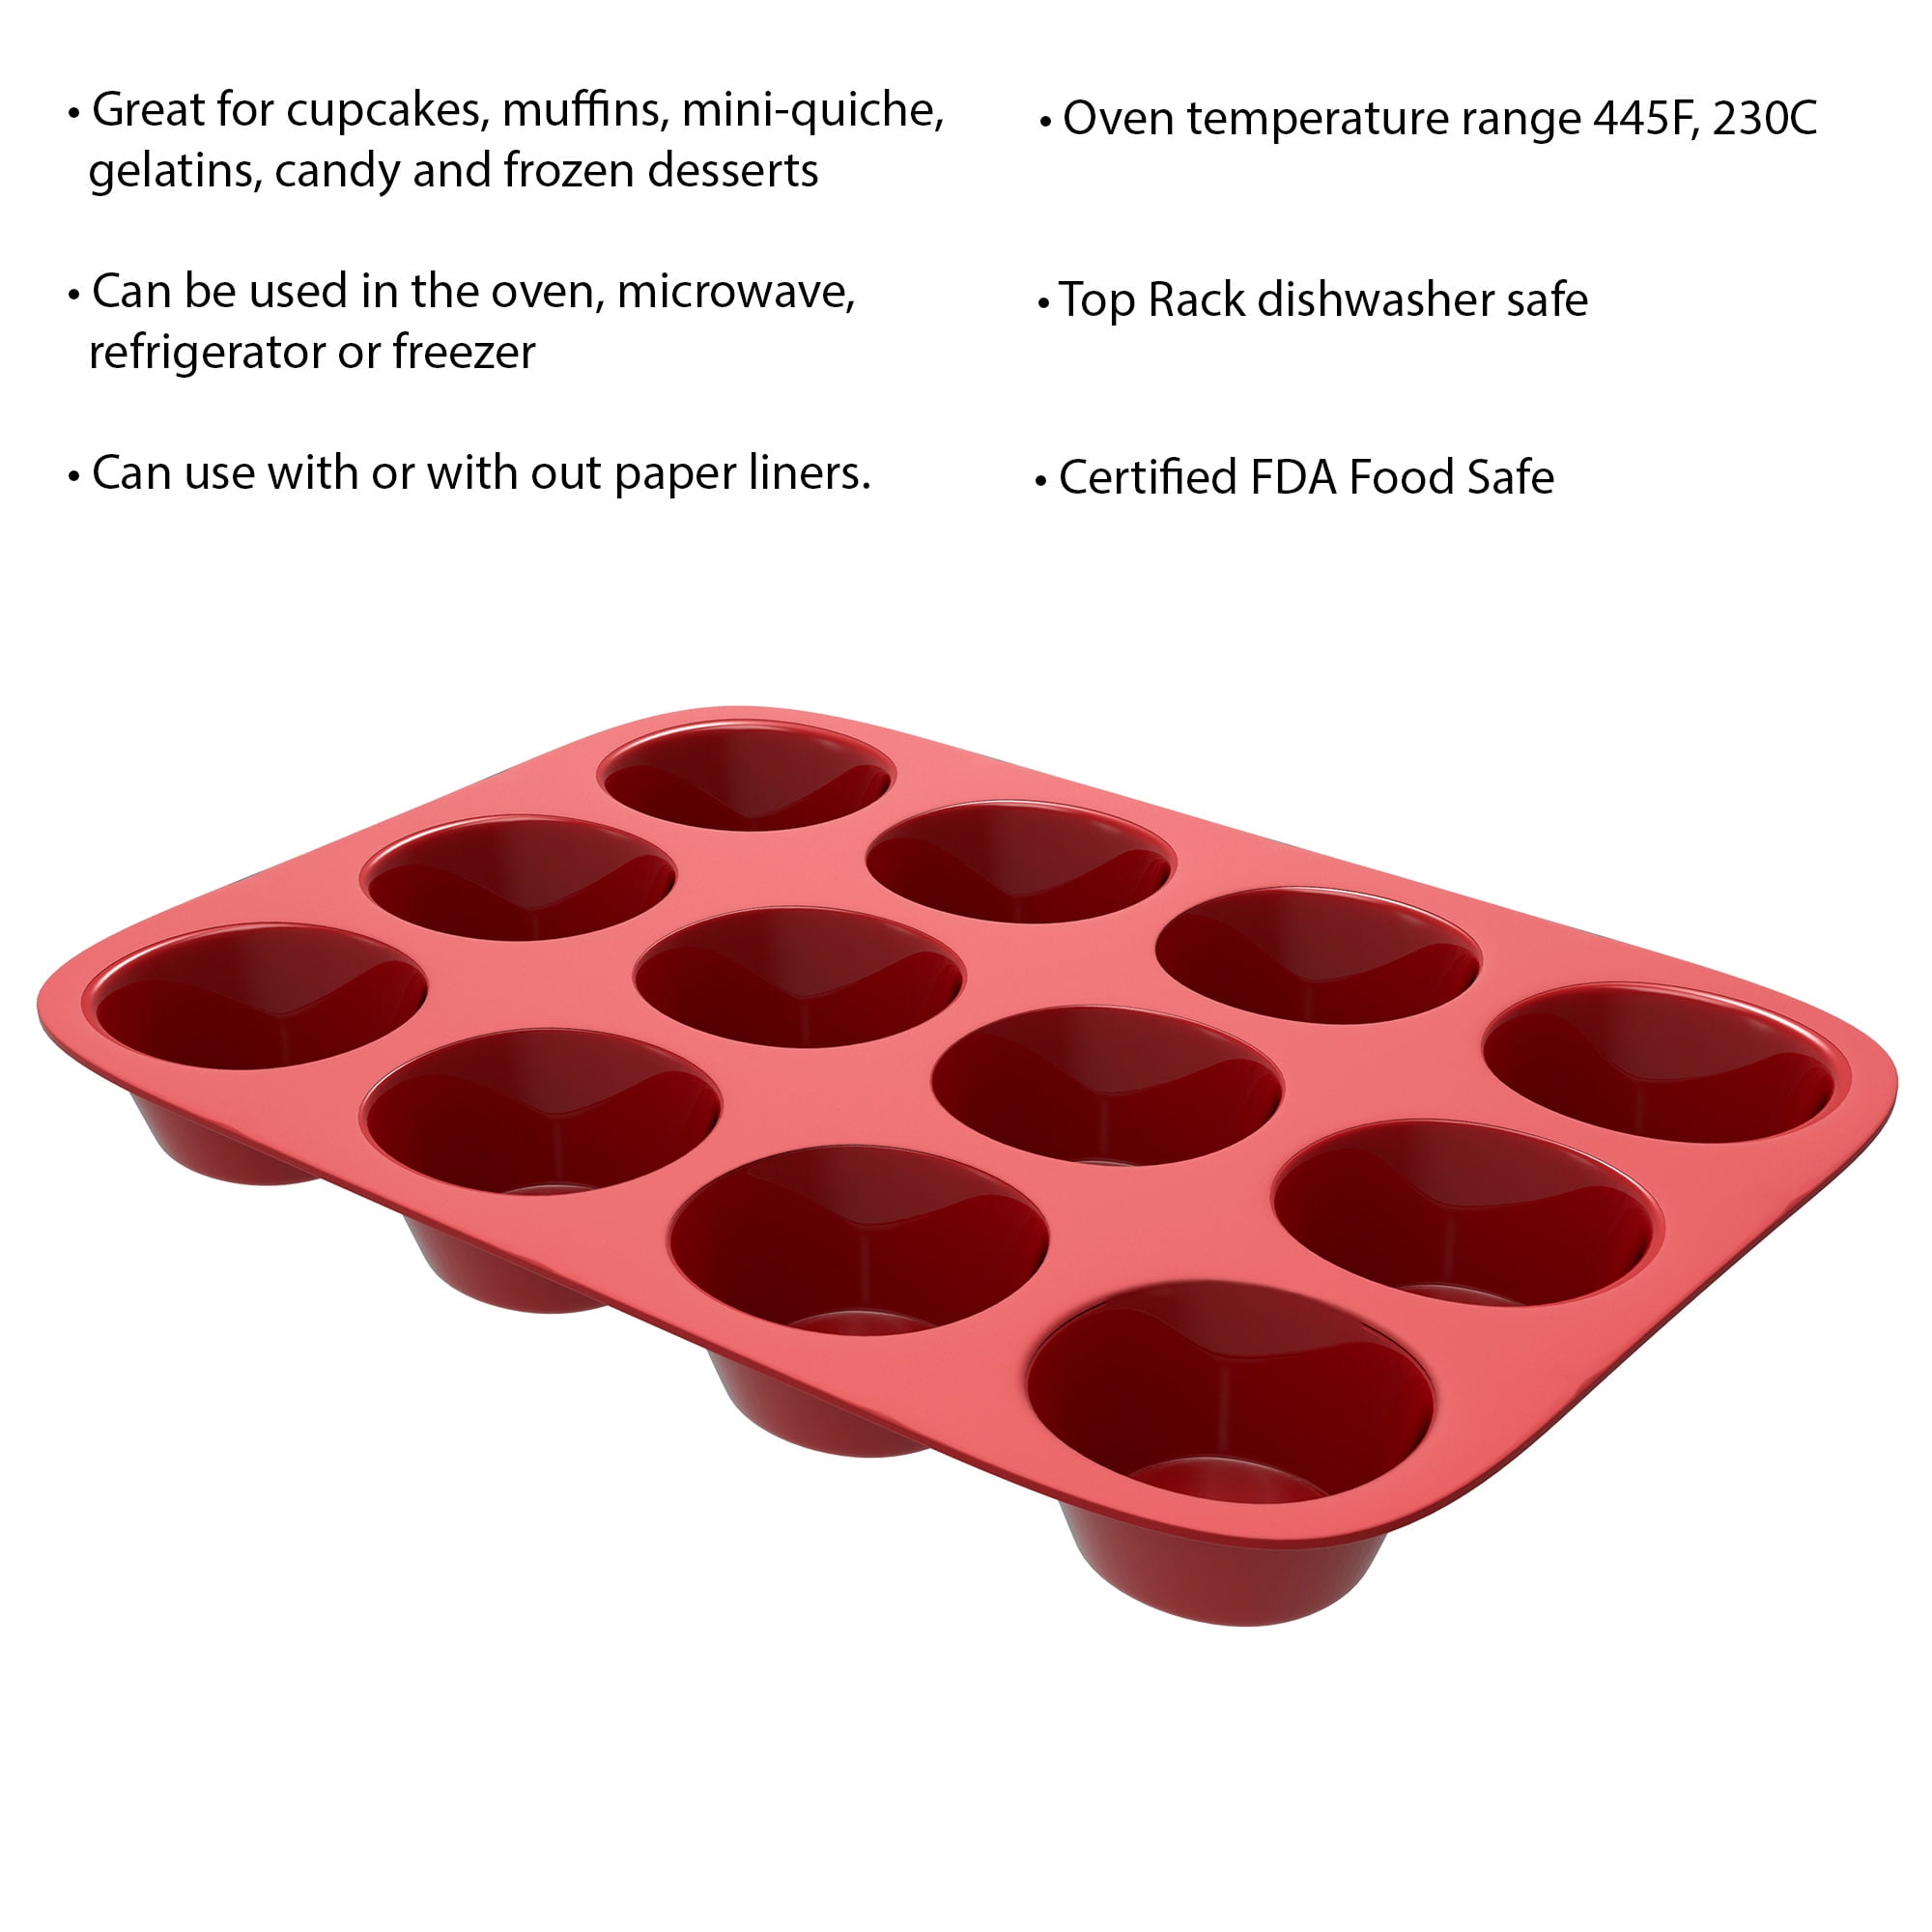 Mini Muffin Pan- Silicone Nonstick Cupcake/Muffin/Brownie Reusable Baking Tray- Microwave and Dishwasher Safe 24 Cups by Chef Buddy Freezer Oven 